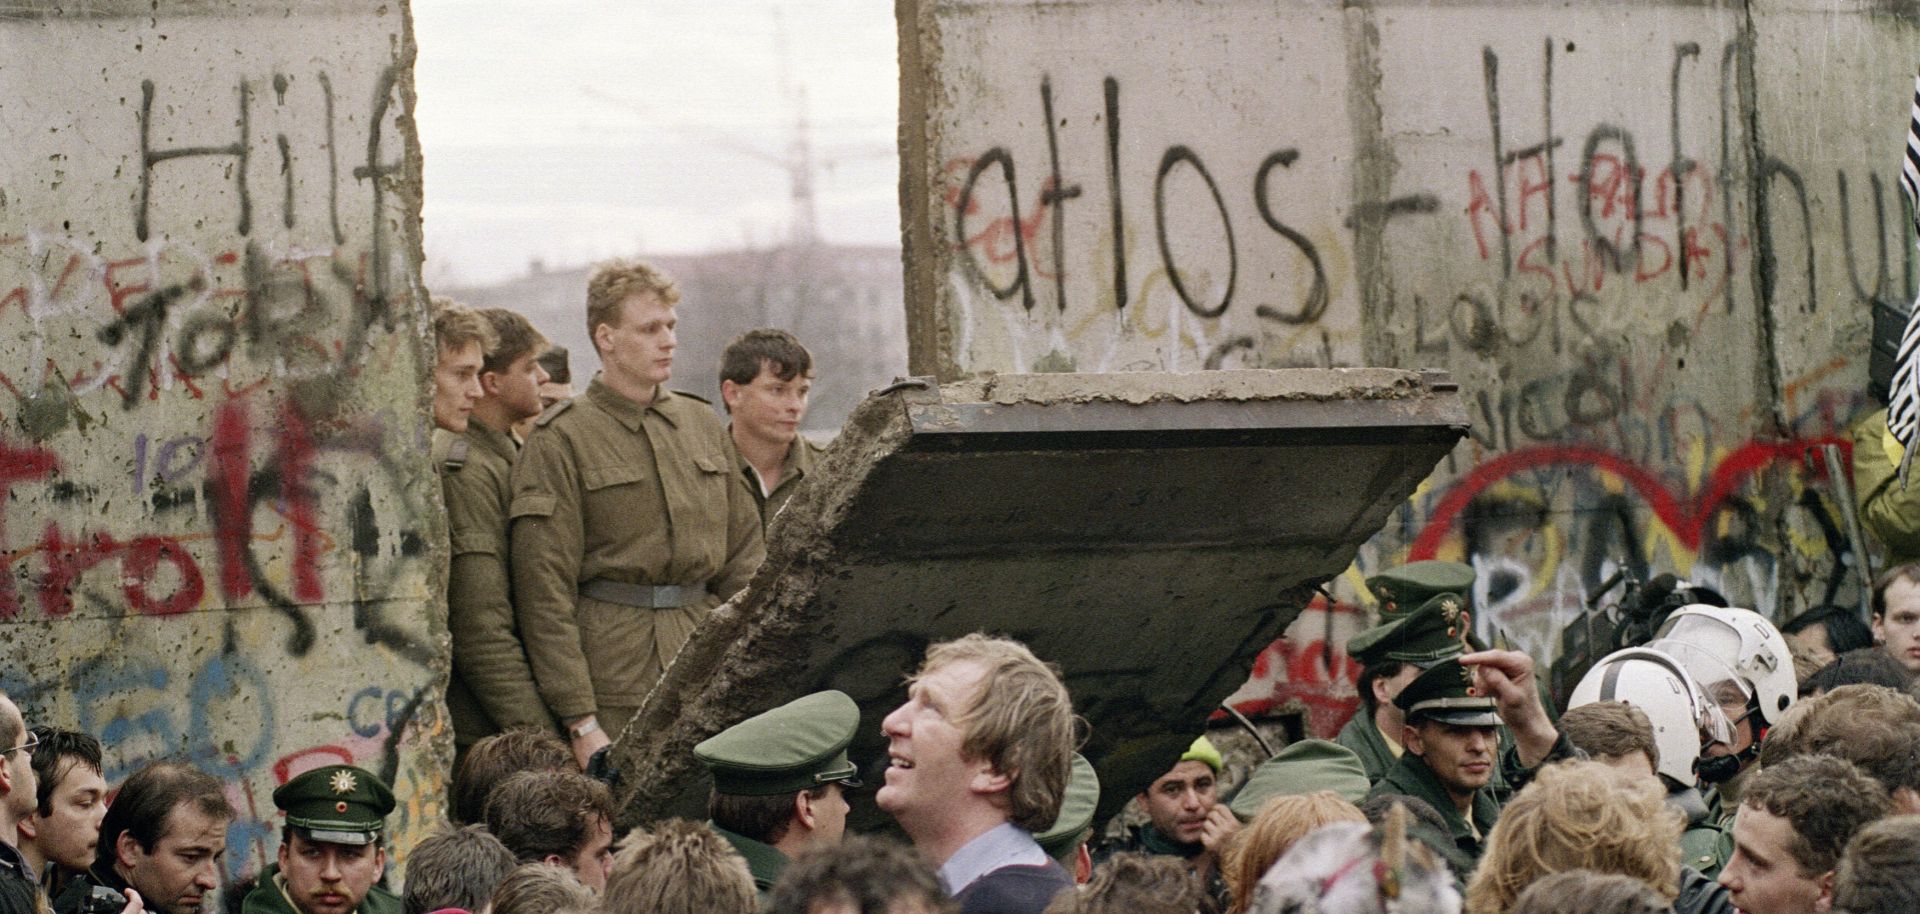 West Berliners crowd in front of the Berlin Wall on Nov. 11, 1989, as they watch East German border guards demolish a section of it.